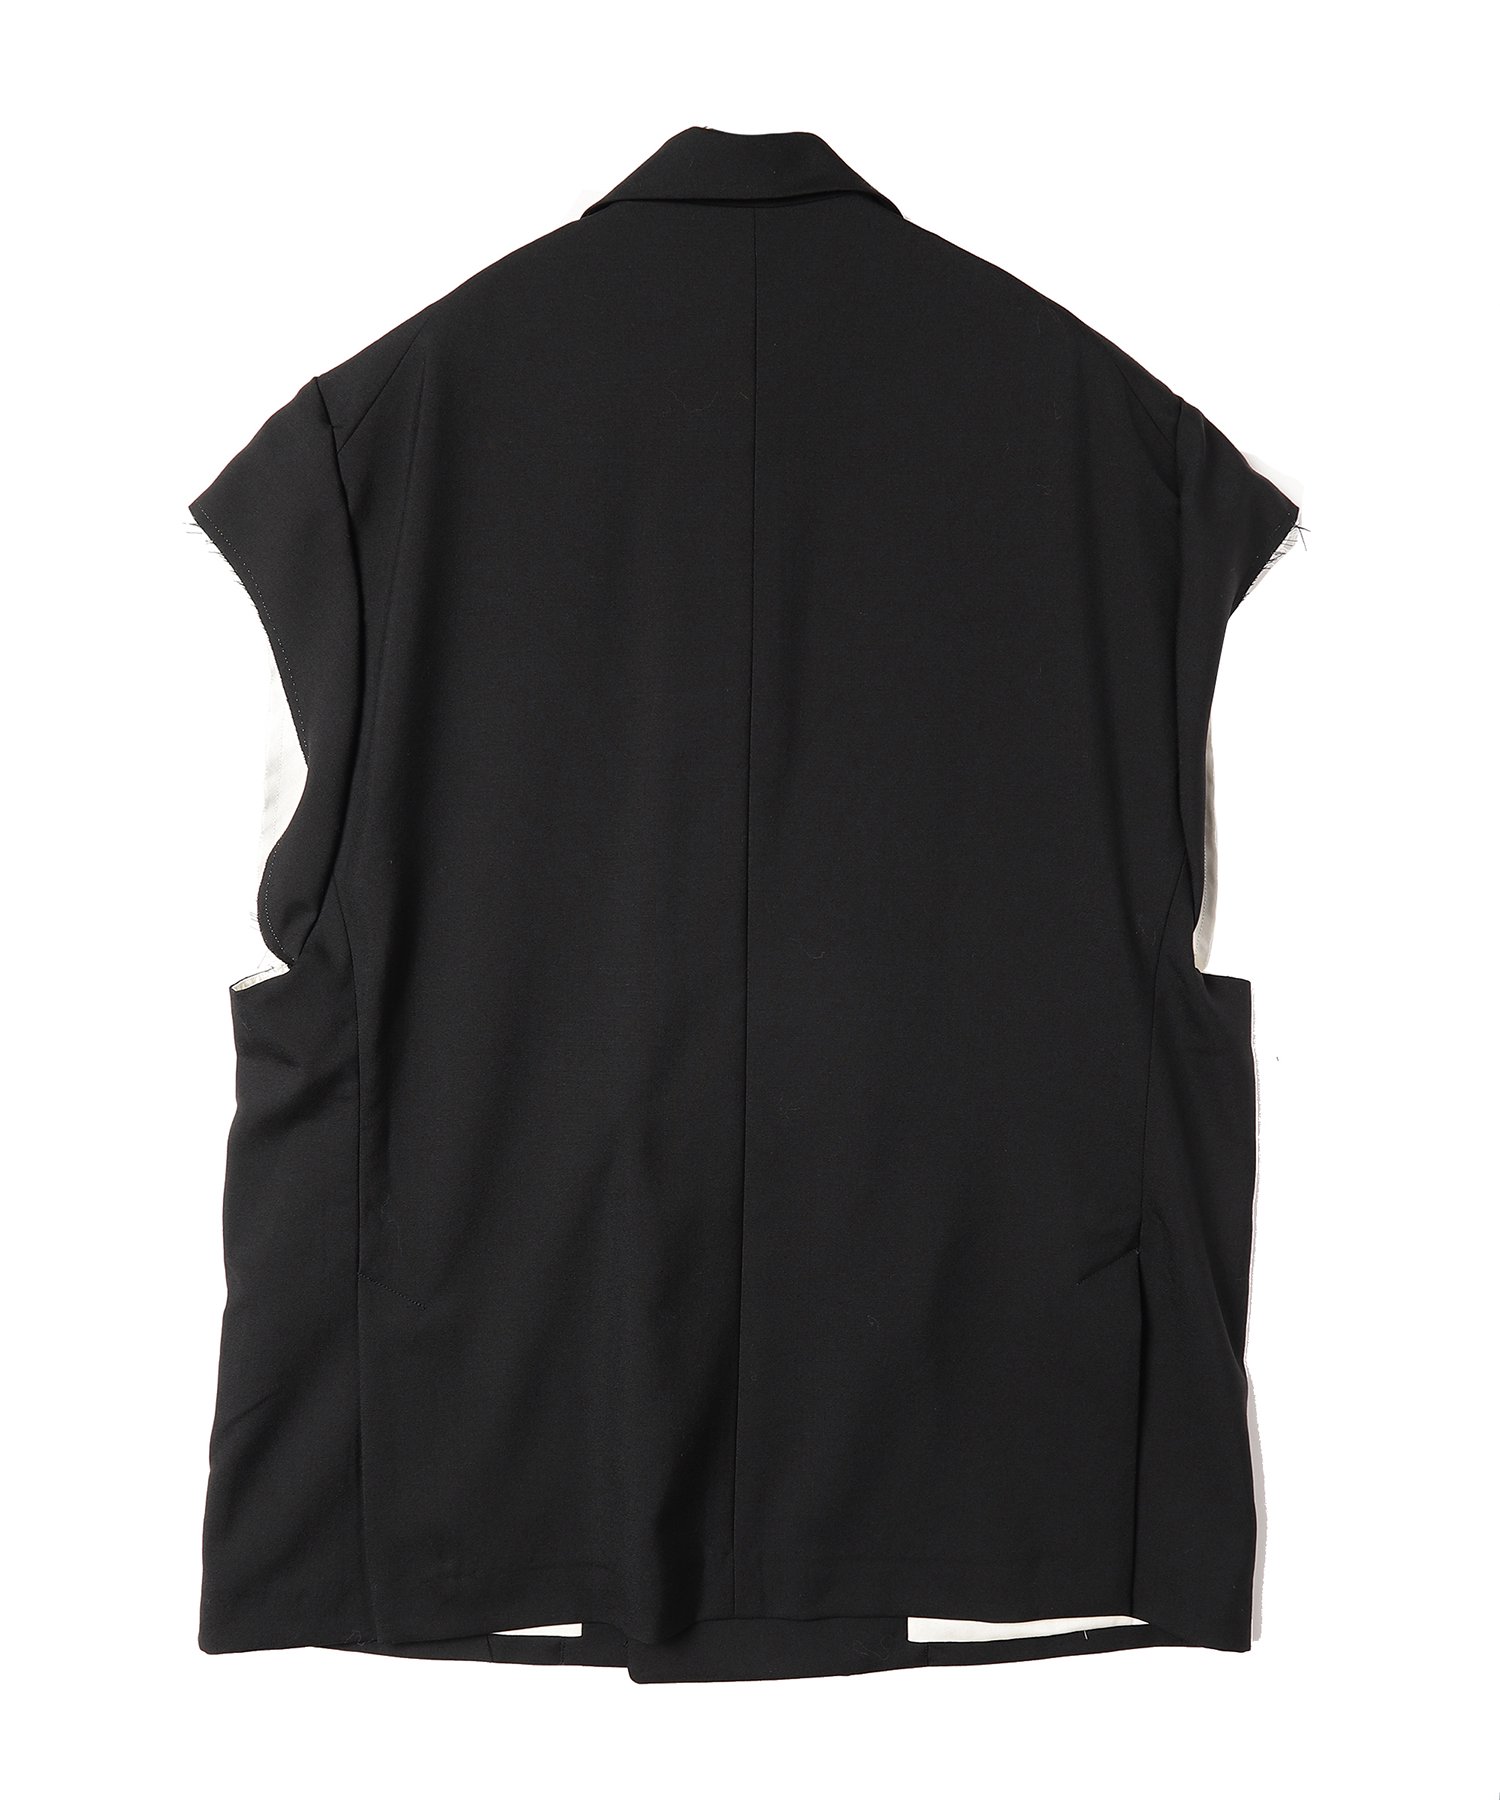 JieDa<br />OVER TAILORED VEST / BLACK<img class='new_mark_img2' src='https://img.shop-pro.jp/img/new/icons14.gif' style='border:none;display:inline;margin:0px;padding:0px;width:auto;' />